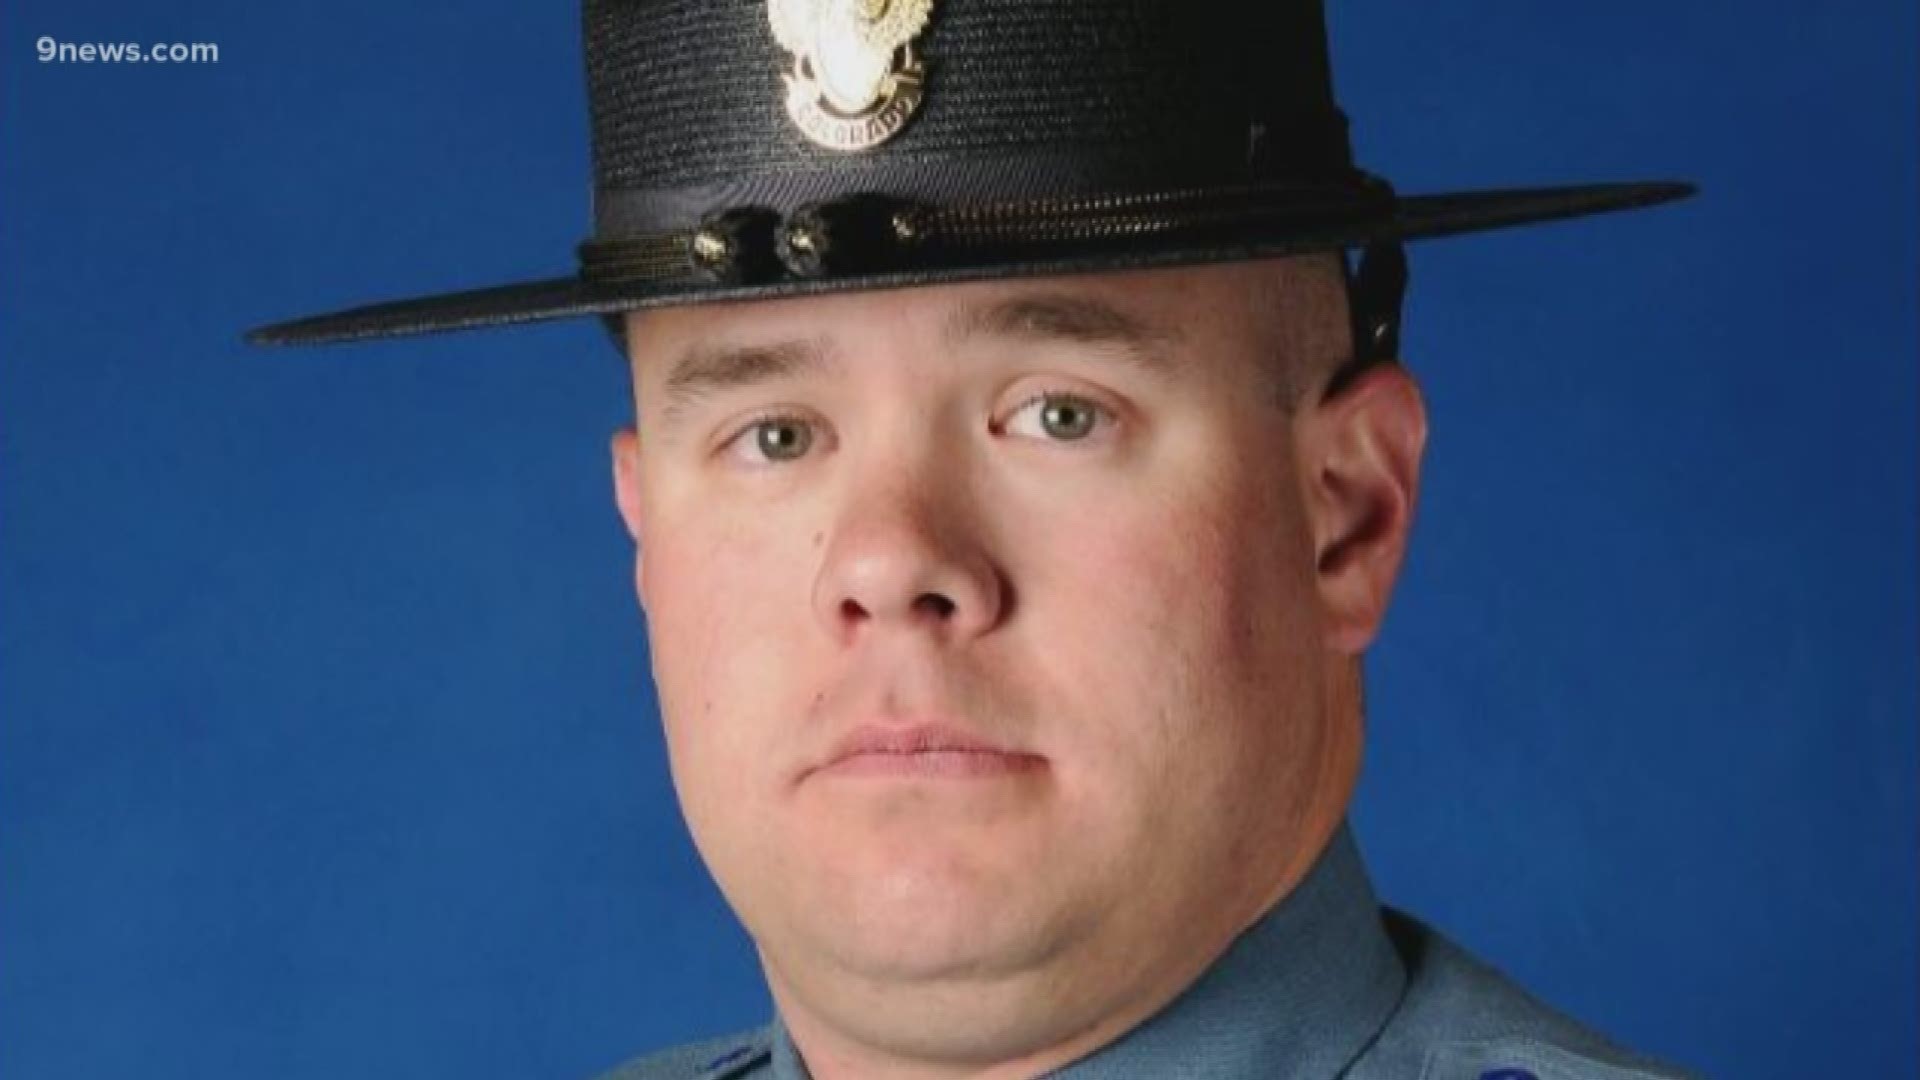 William Moden, 37, had been a state trooper for 12 years.